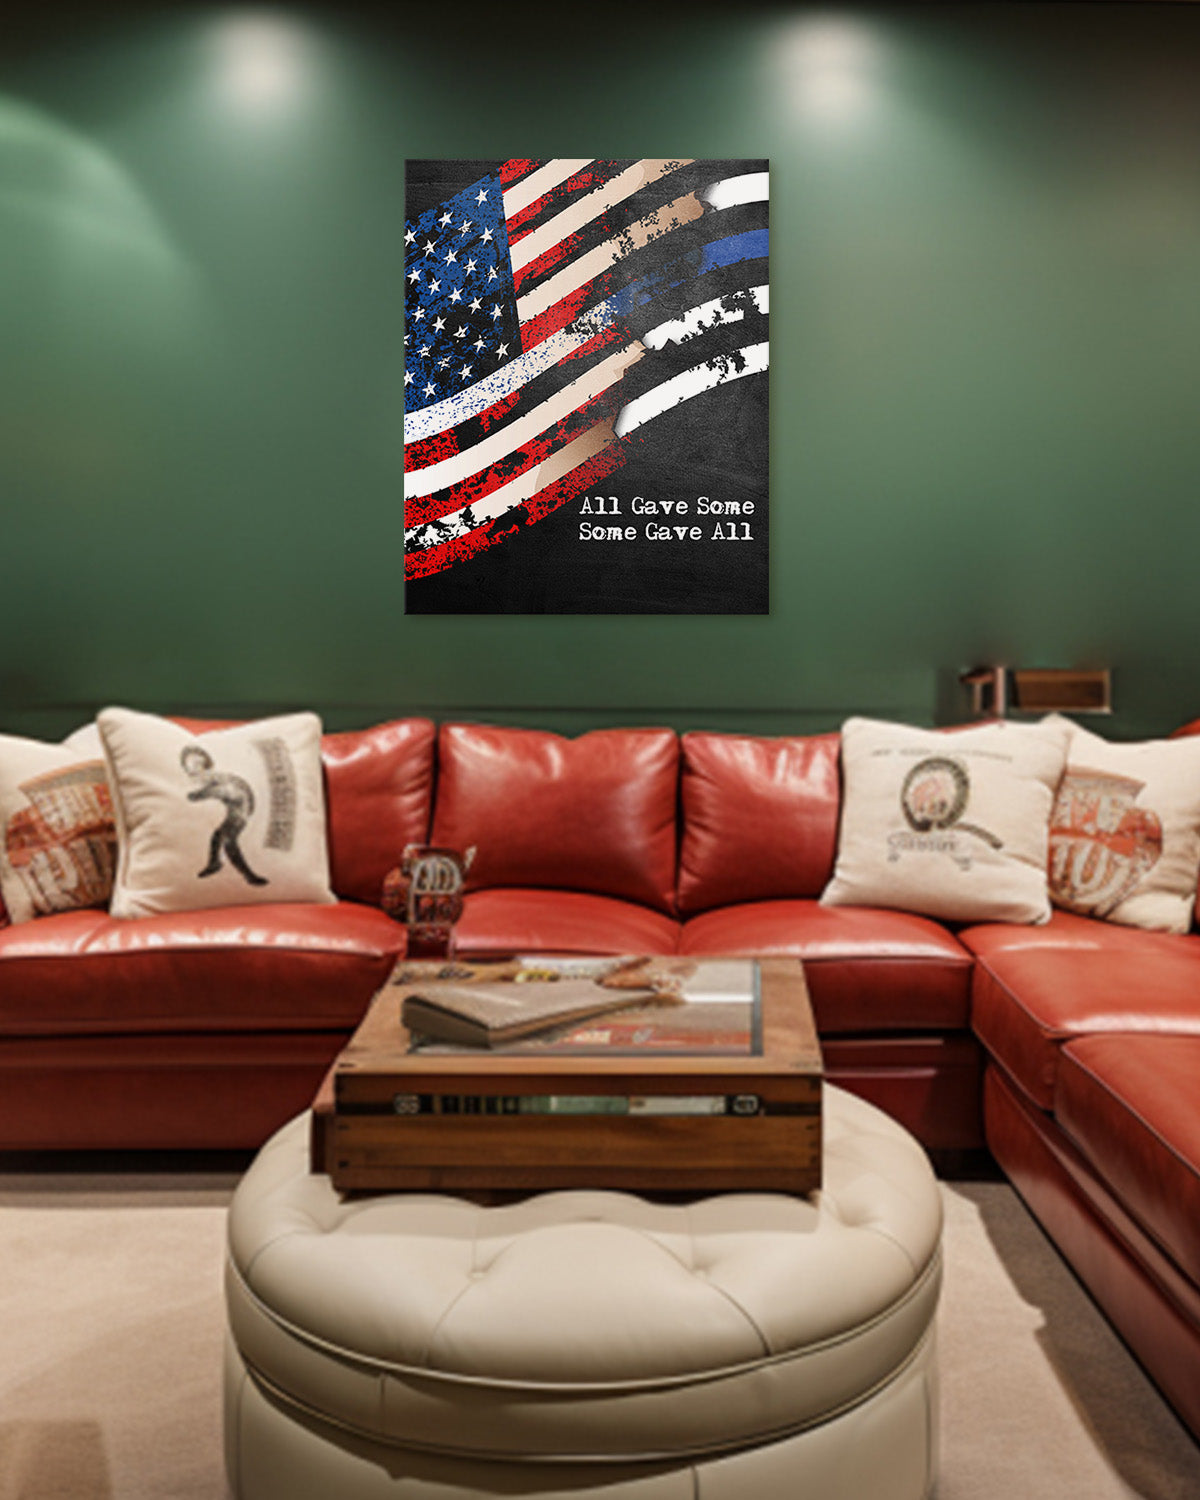 All Gave Some, Some Gave All - Law Enforcement Wall art - Police Officer Gifts